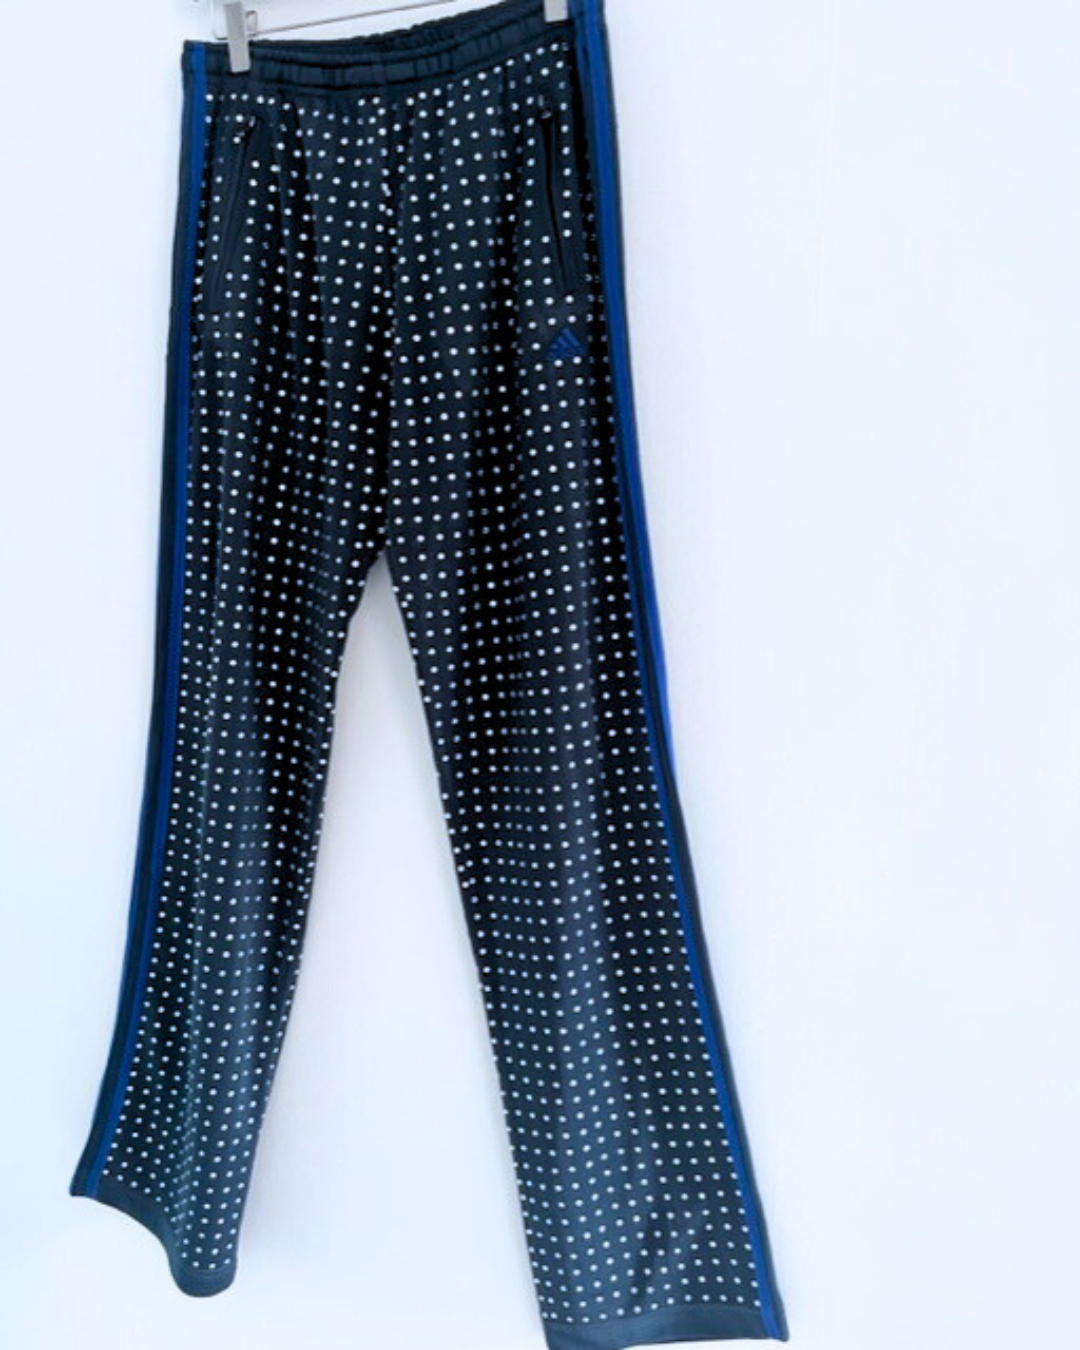 Vintage Grey/Black and Blue Stripe ADIDAS Tracksuit pants with all over diamante studs